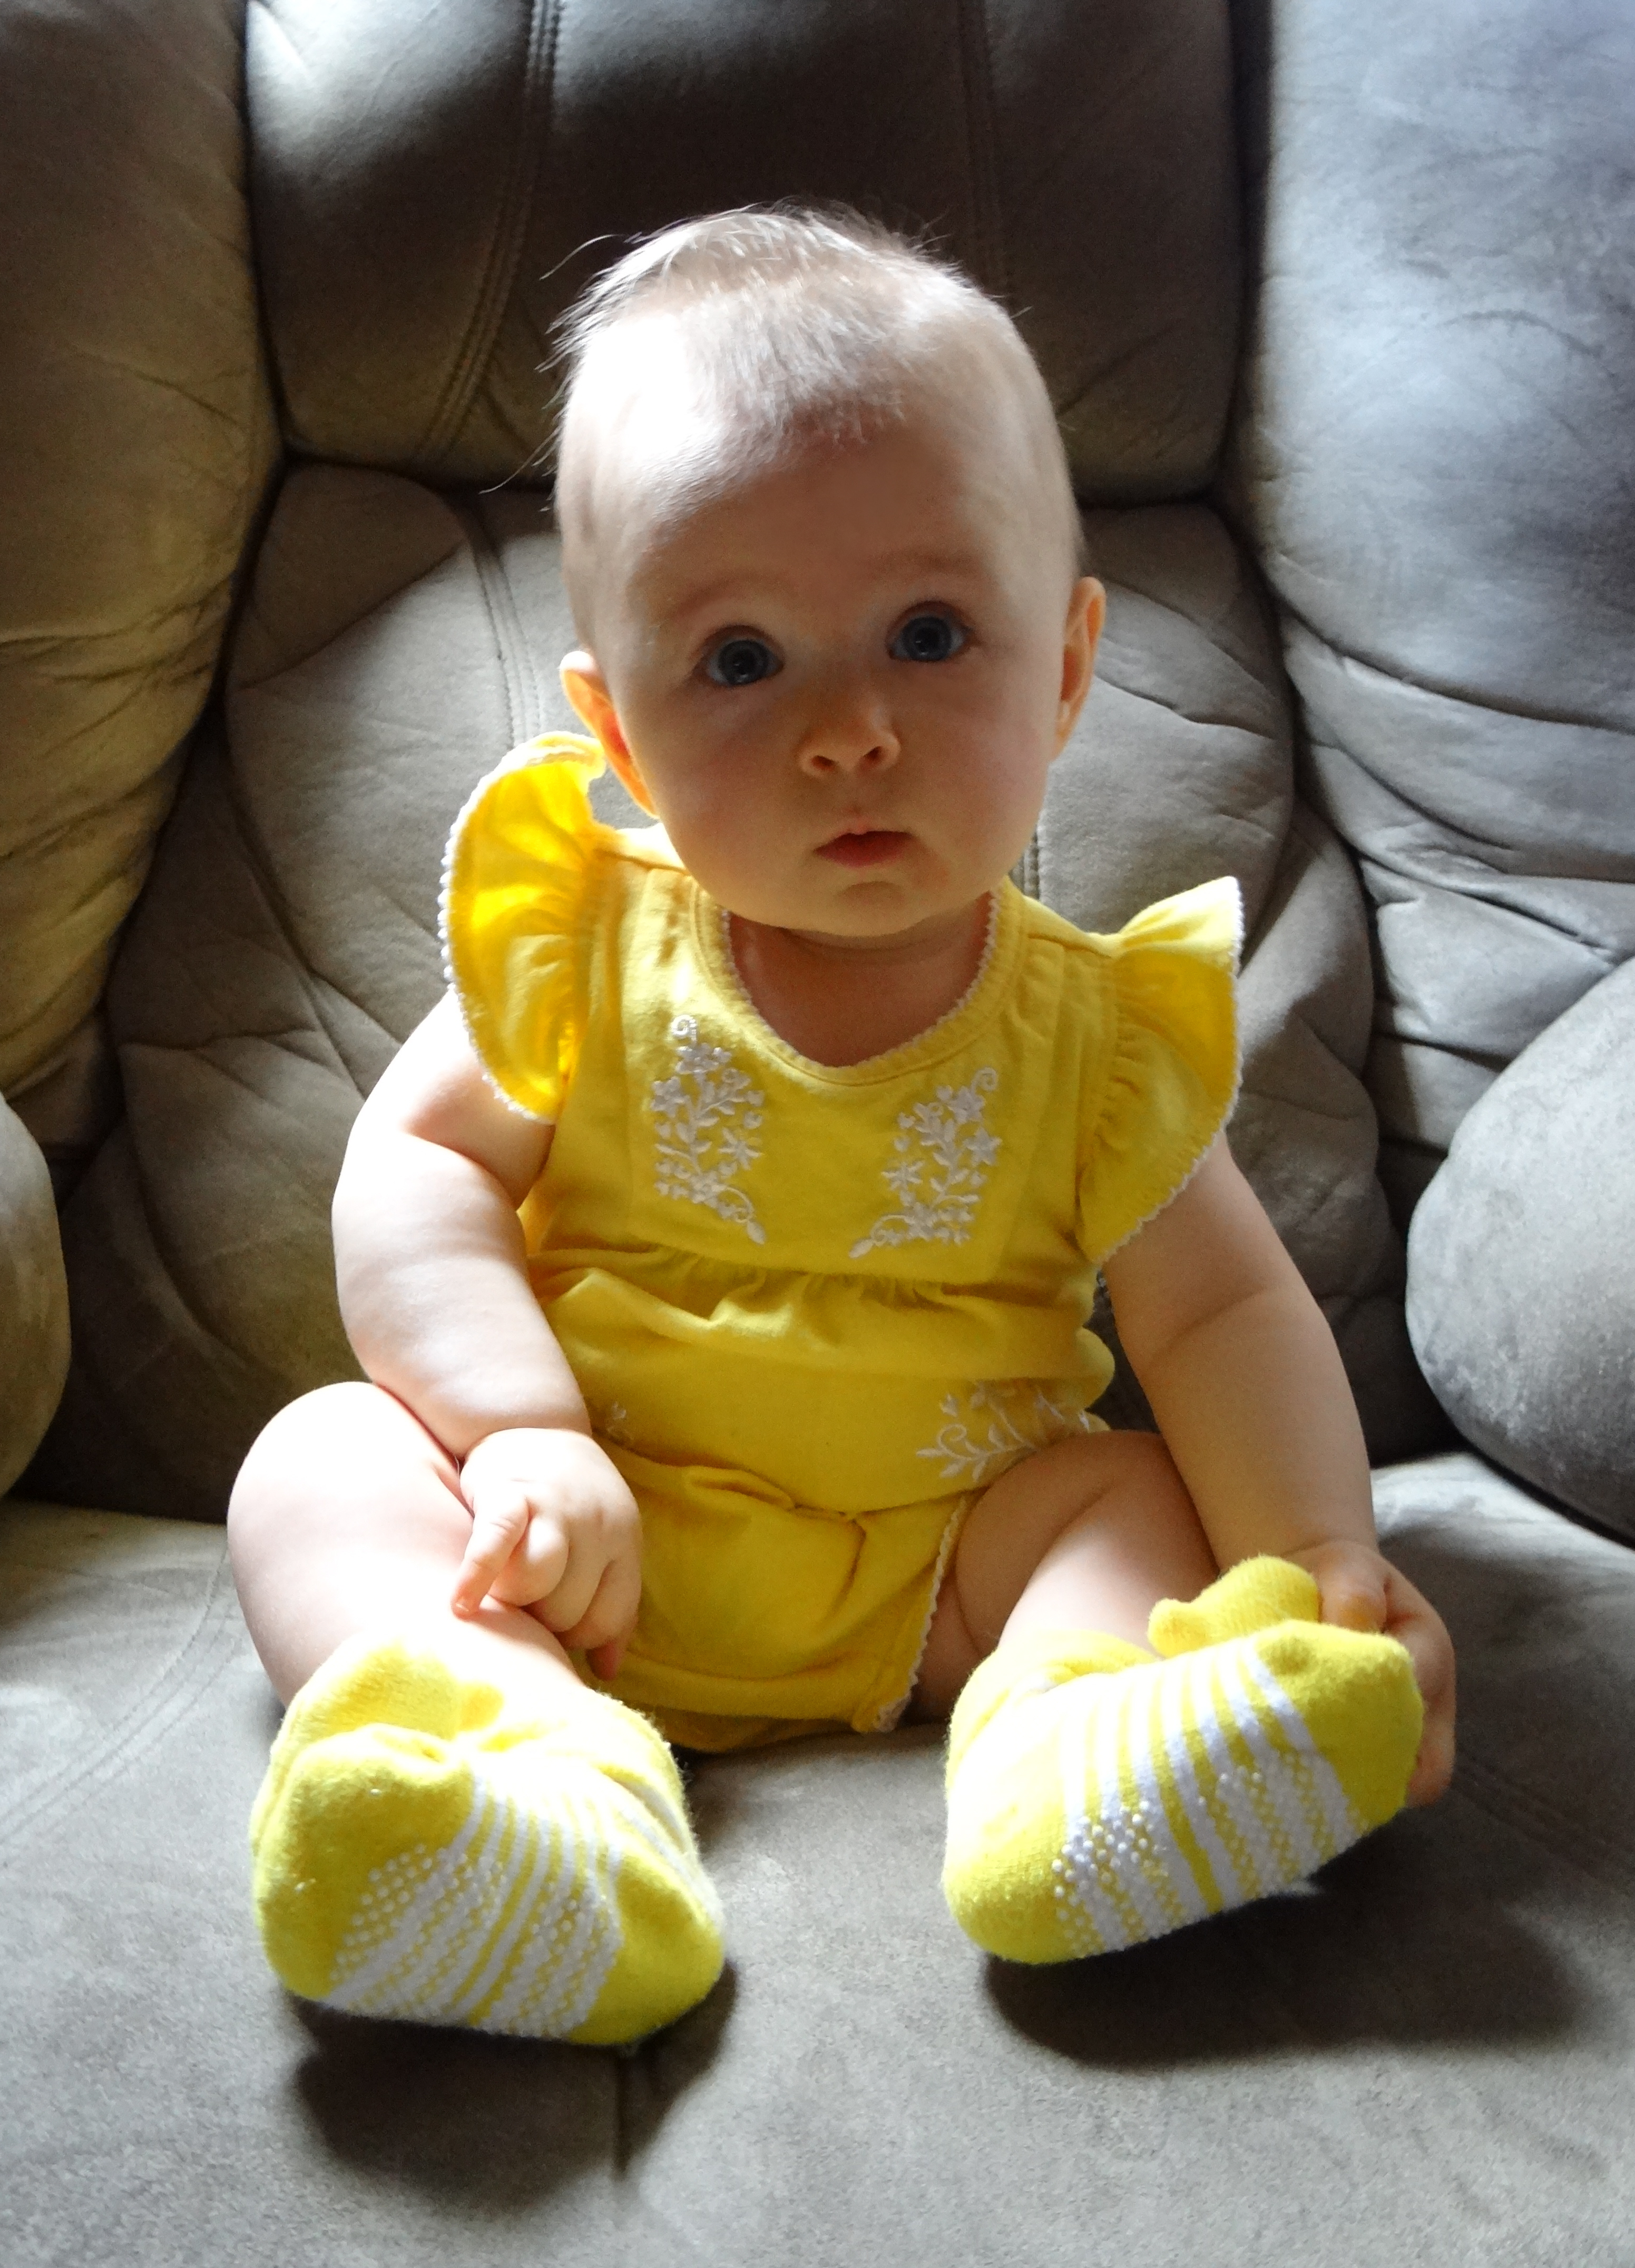 Infant wearing a yellow outfit sitting unassisted